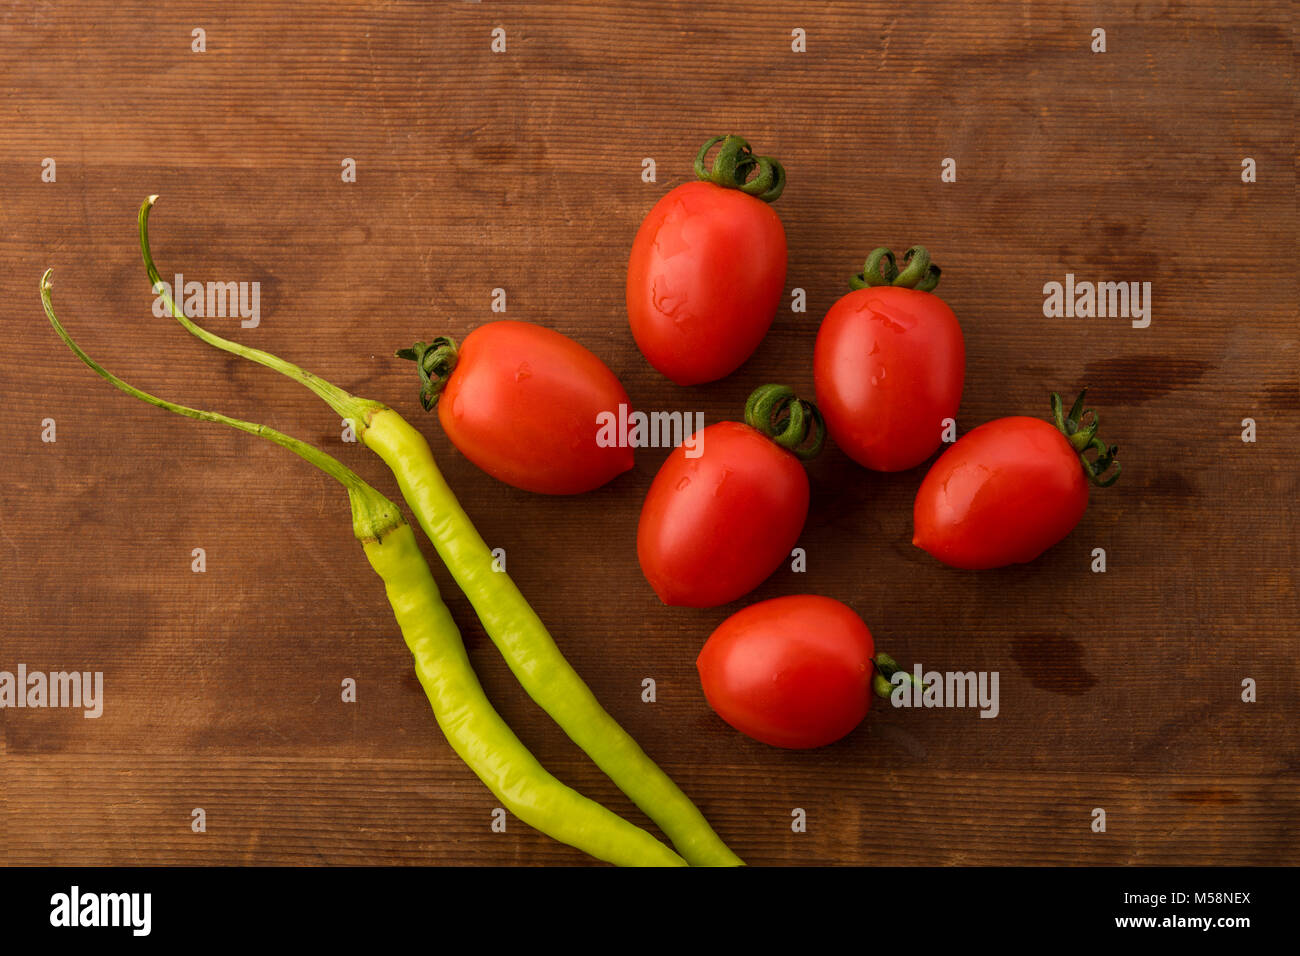 Vegetable: Top View of Fresh Red Baby Tomatoes and Green Chilies on Brown Wooden Background Stock Photo